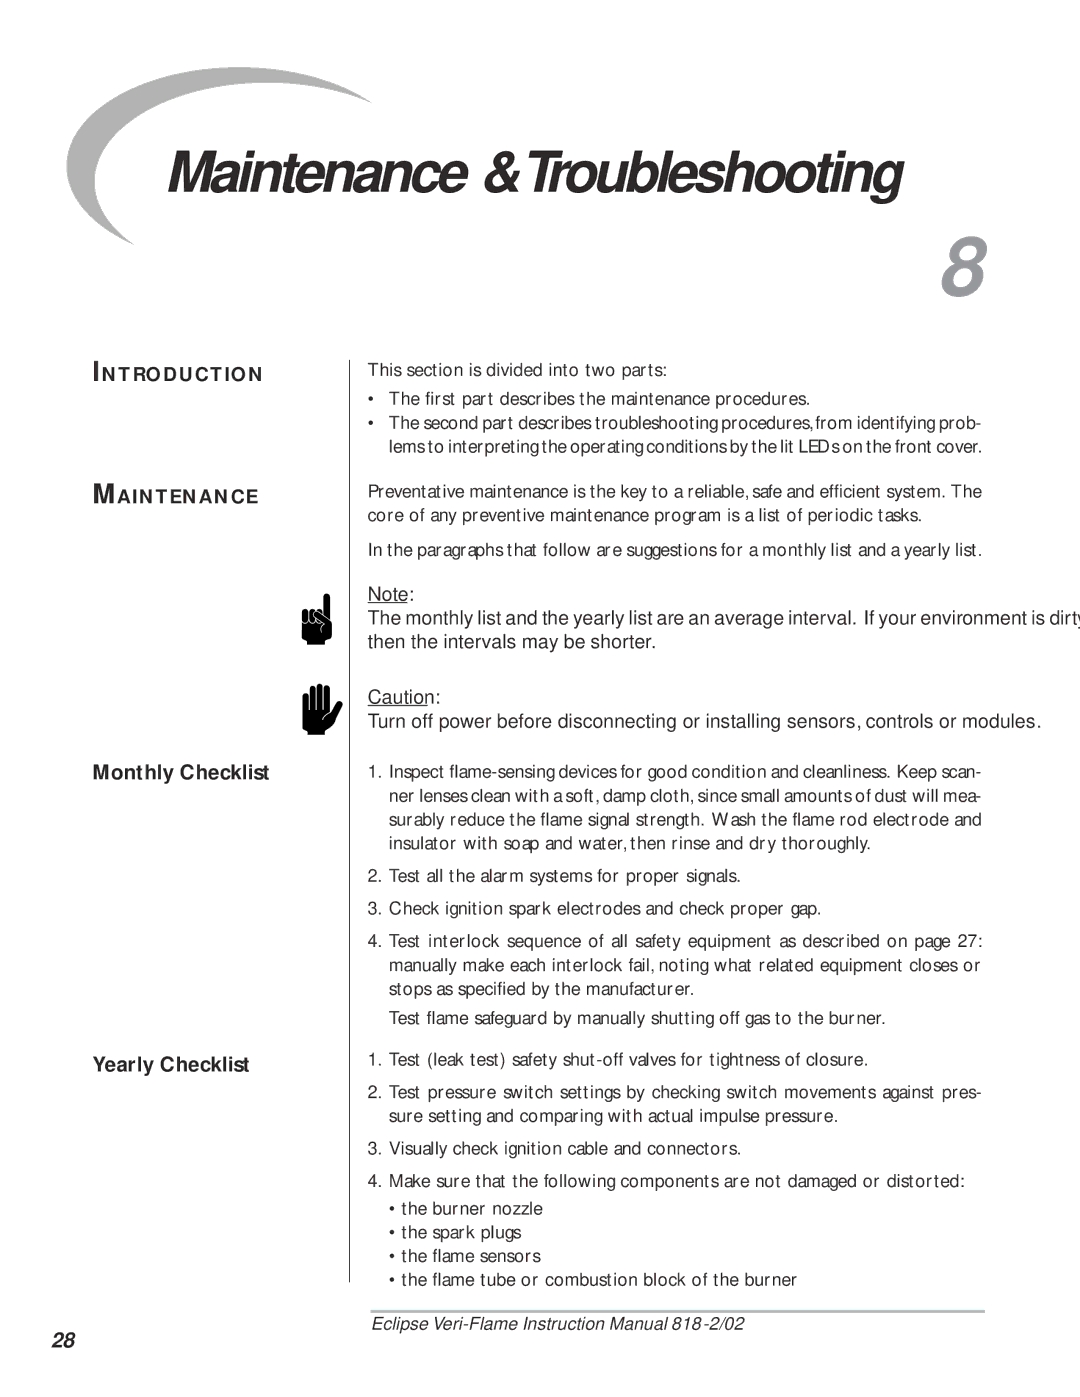 Eclipse Combustion 5600 Maintenance &Troubleshooting, Monthly Checklist Yearly Checklist, Introduction Maintenance 